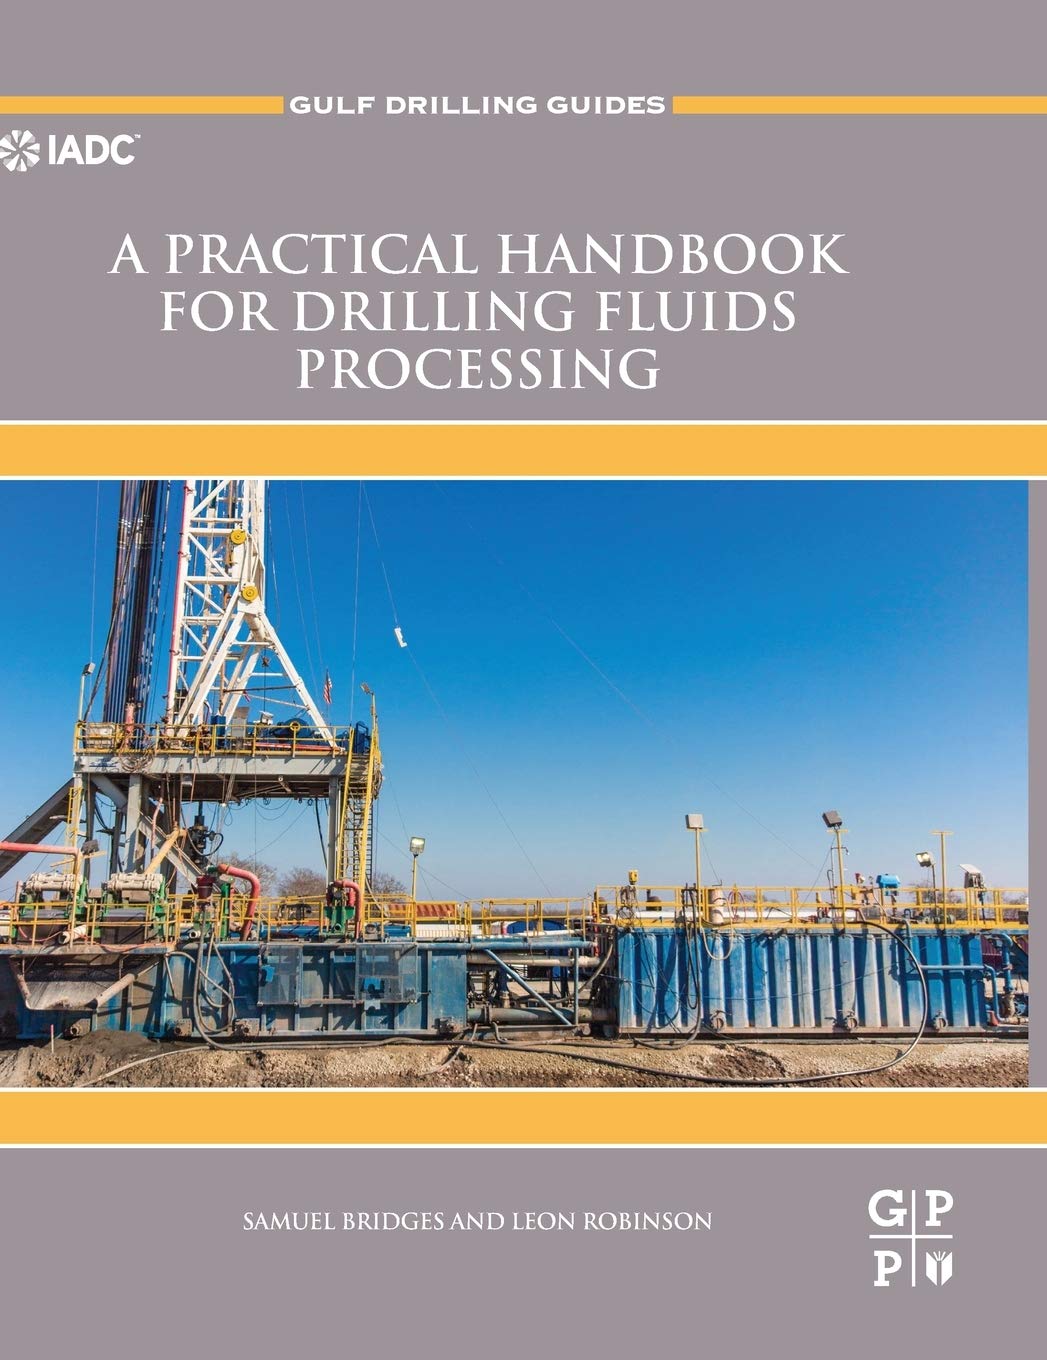 A Practical Handbook for Drilling Fluids Processing (Gulf Drilling Guides)